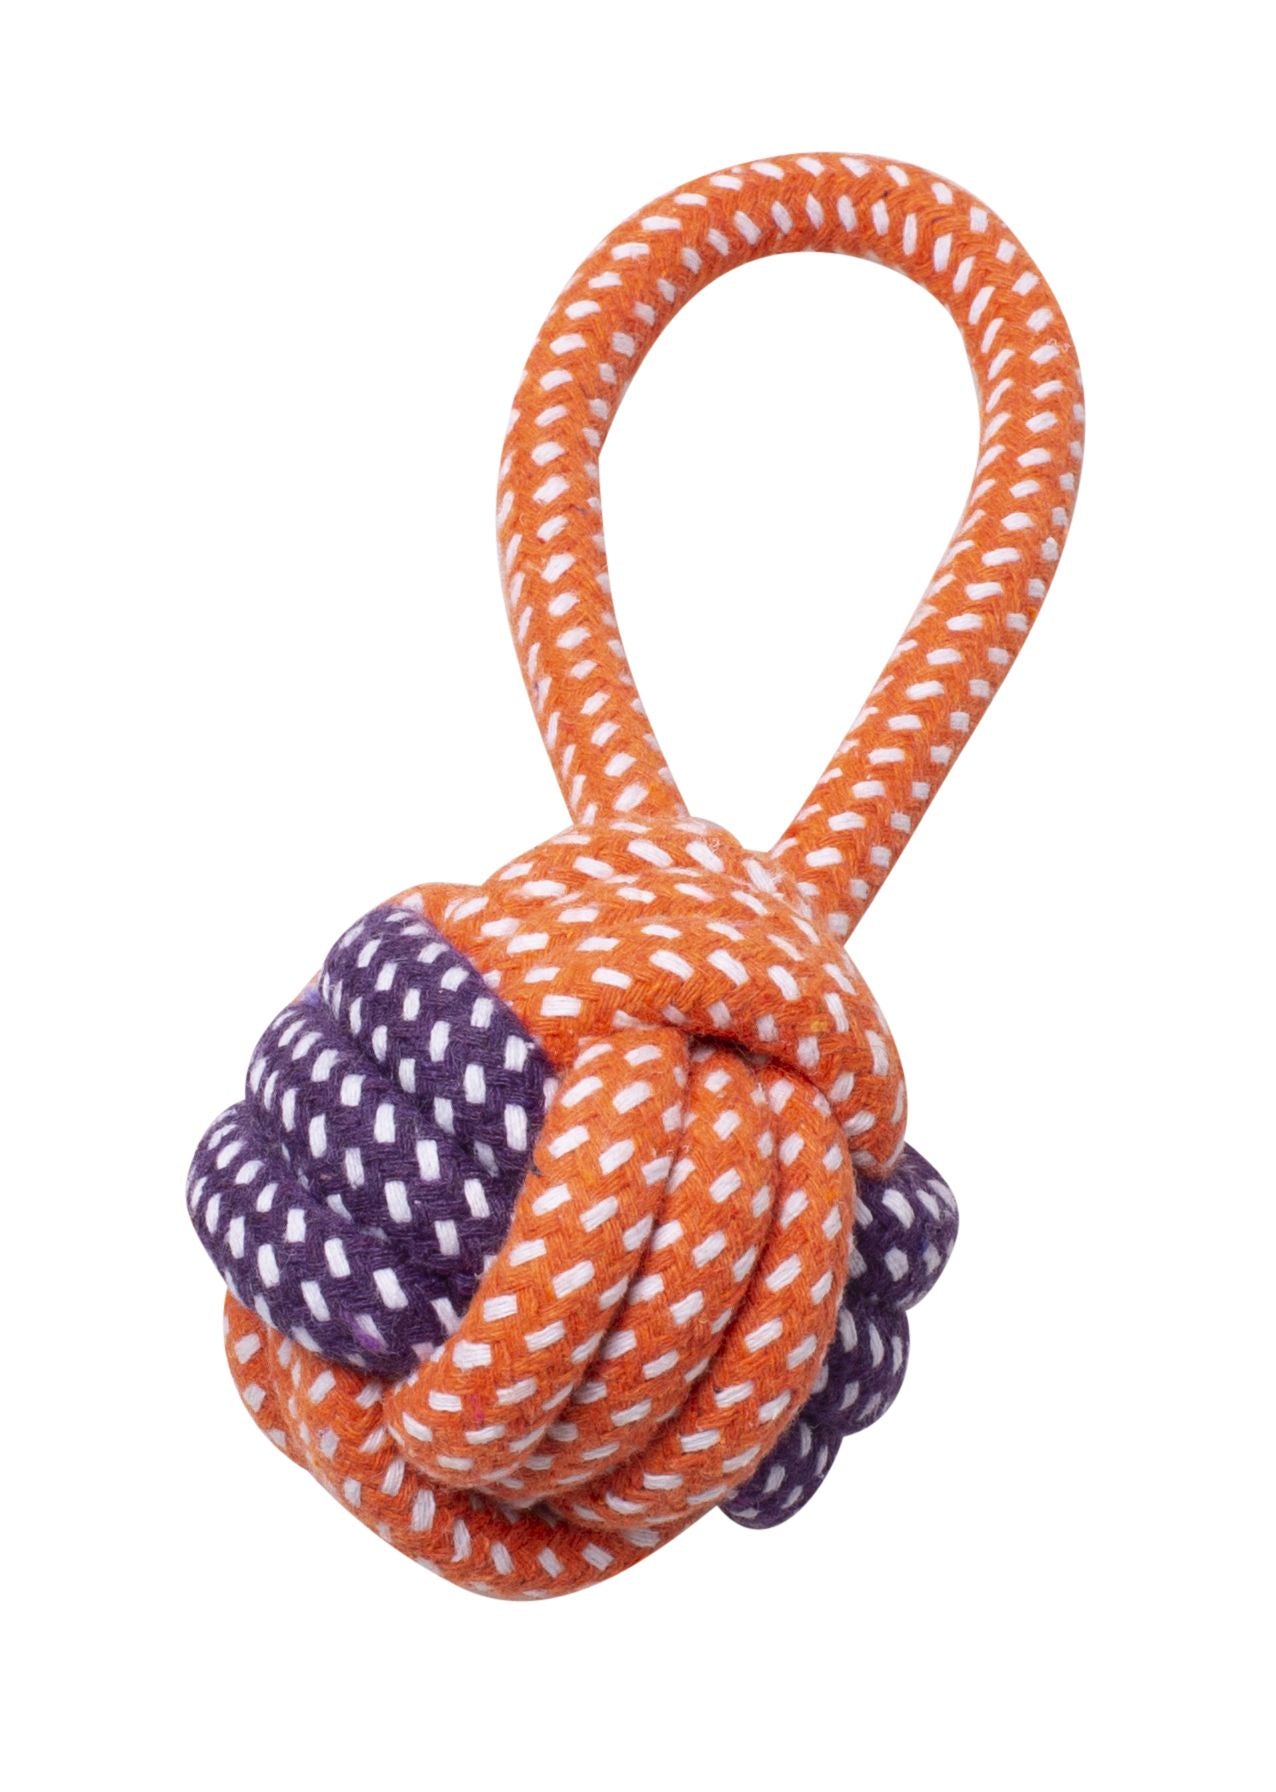 Bud'z Rope Monkey Fist With Loop - Orange And Purple Dog Toy (7.5")